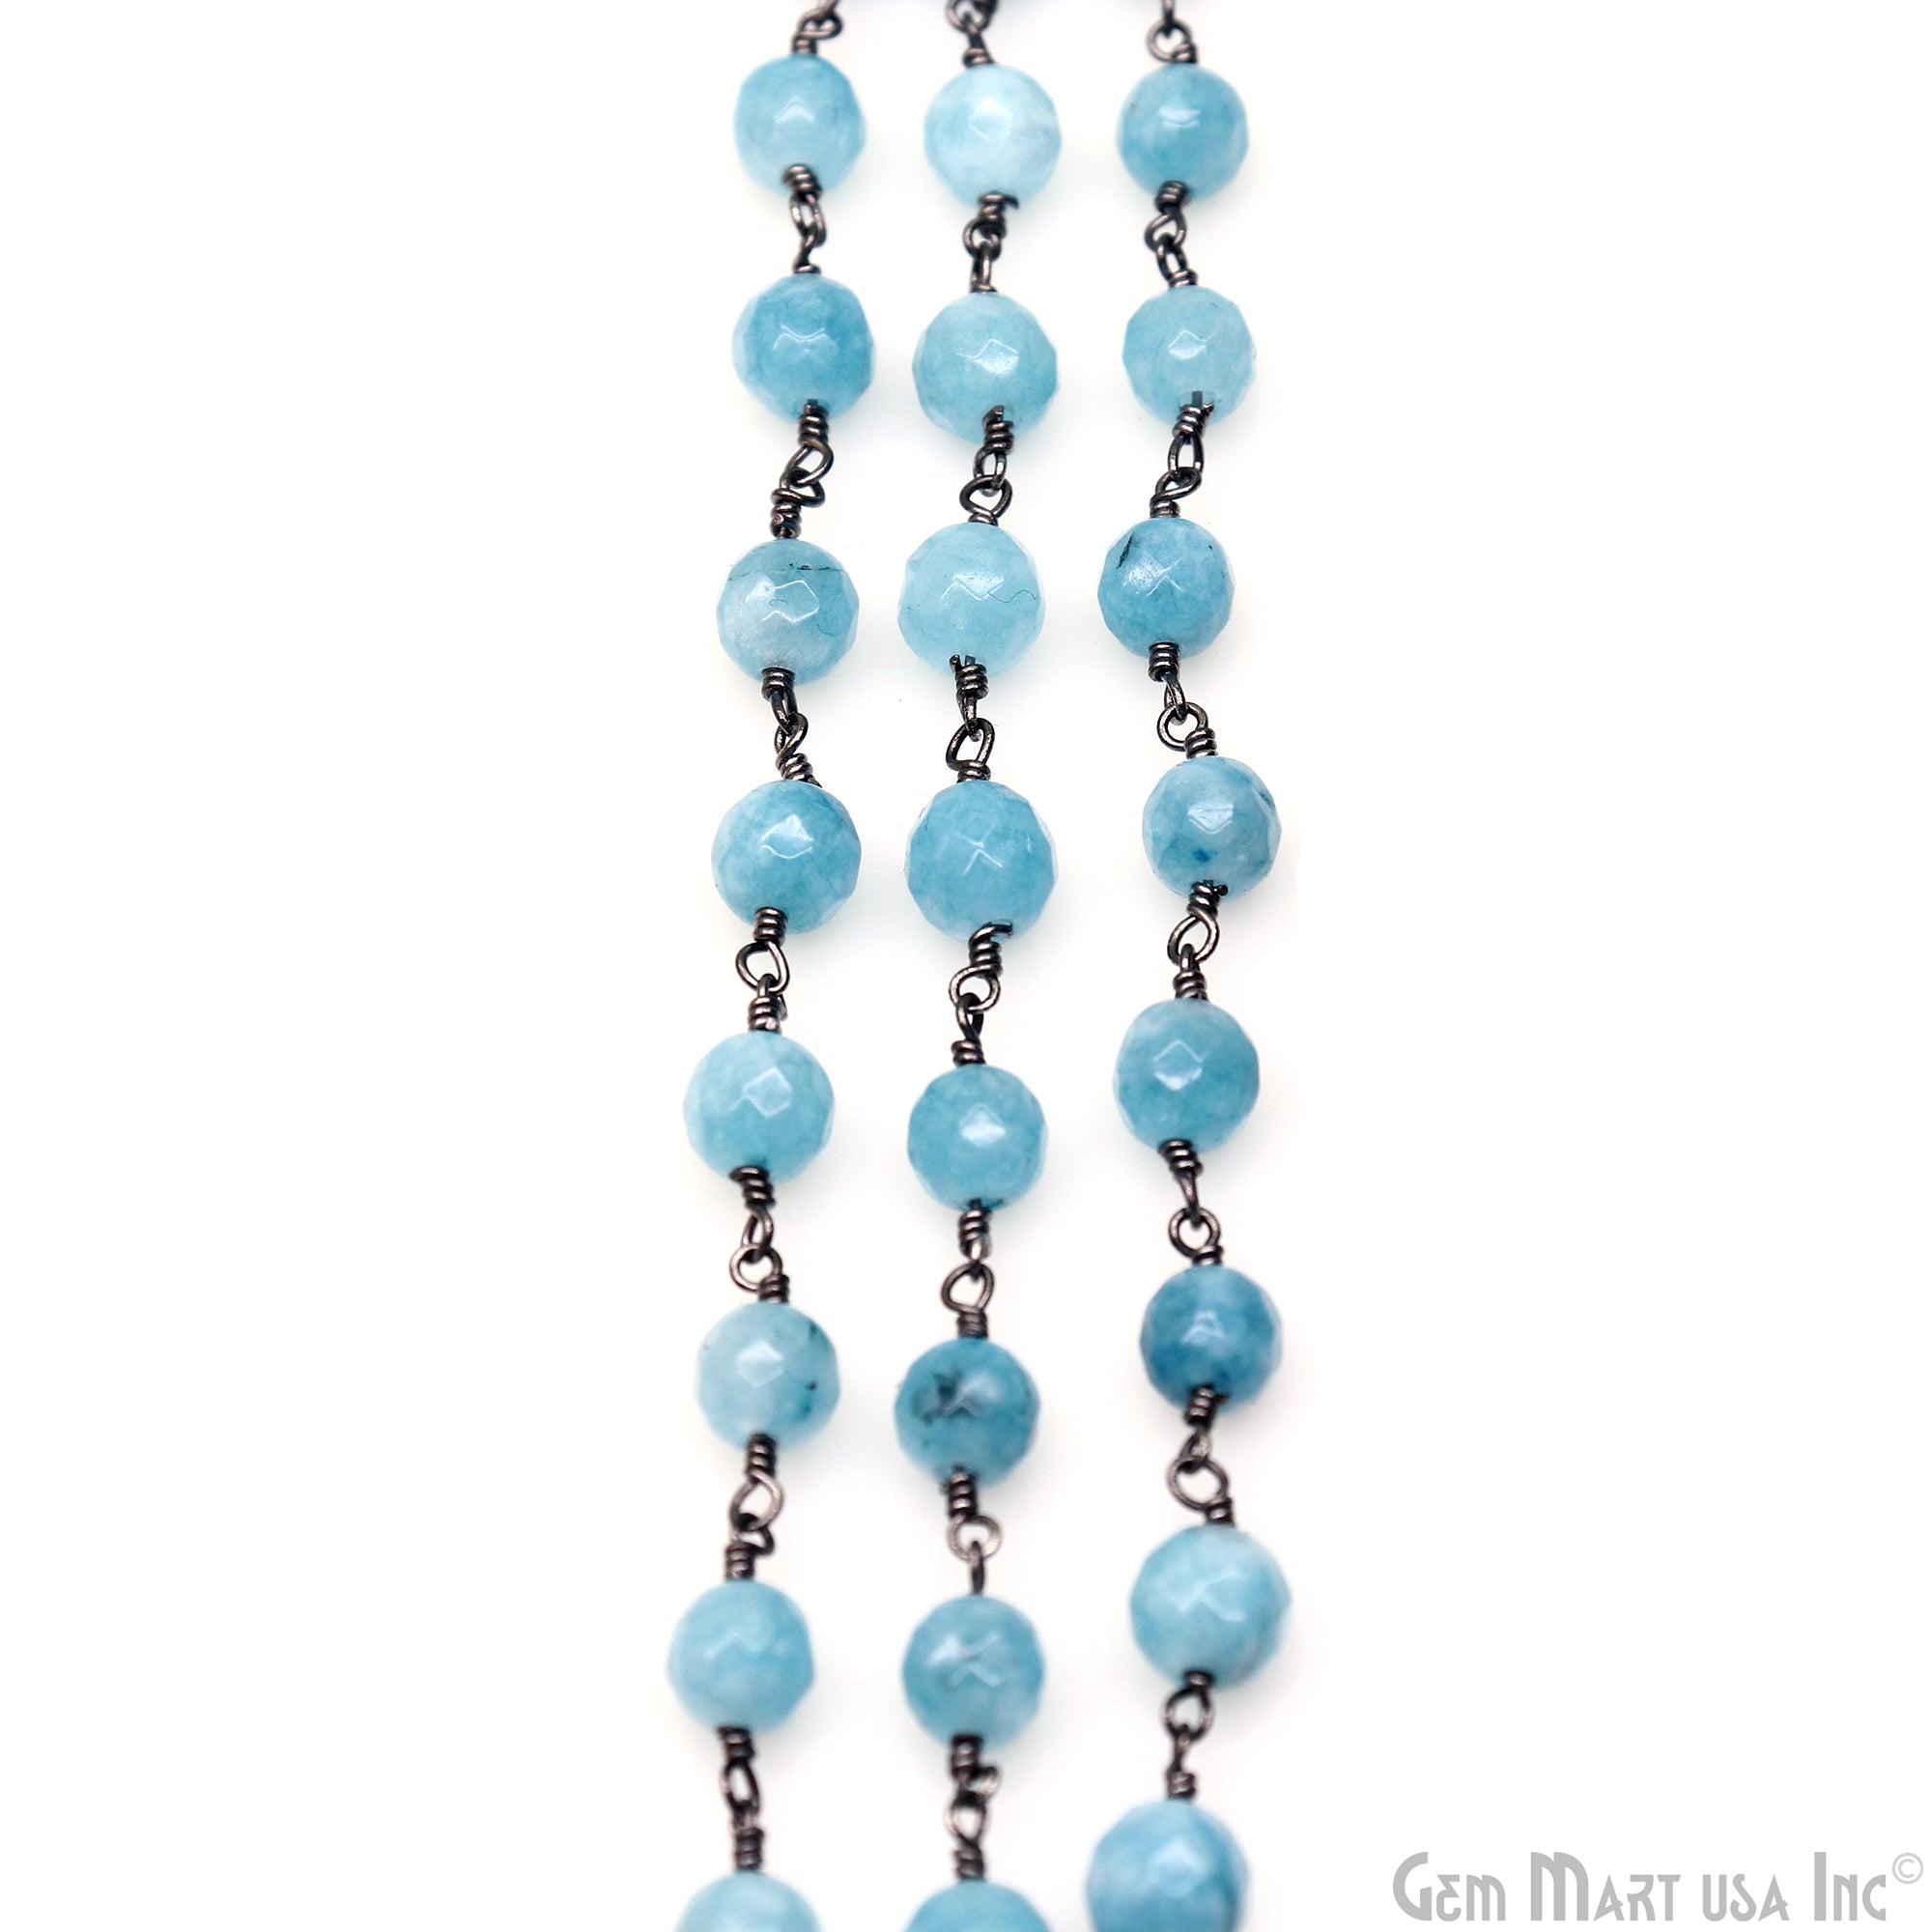 Shaded Blue Jade Faceted Beads 6mm Oxidized Gemstone Rosary Chain